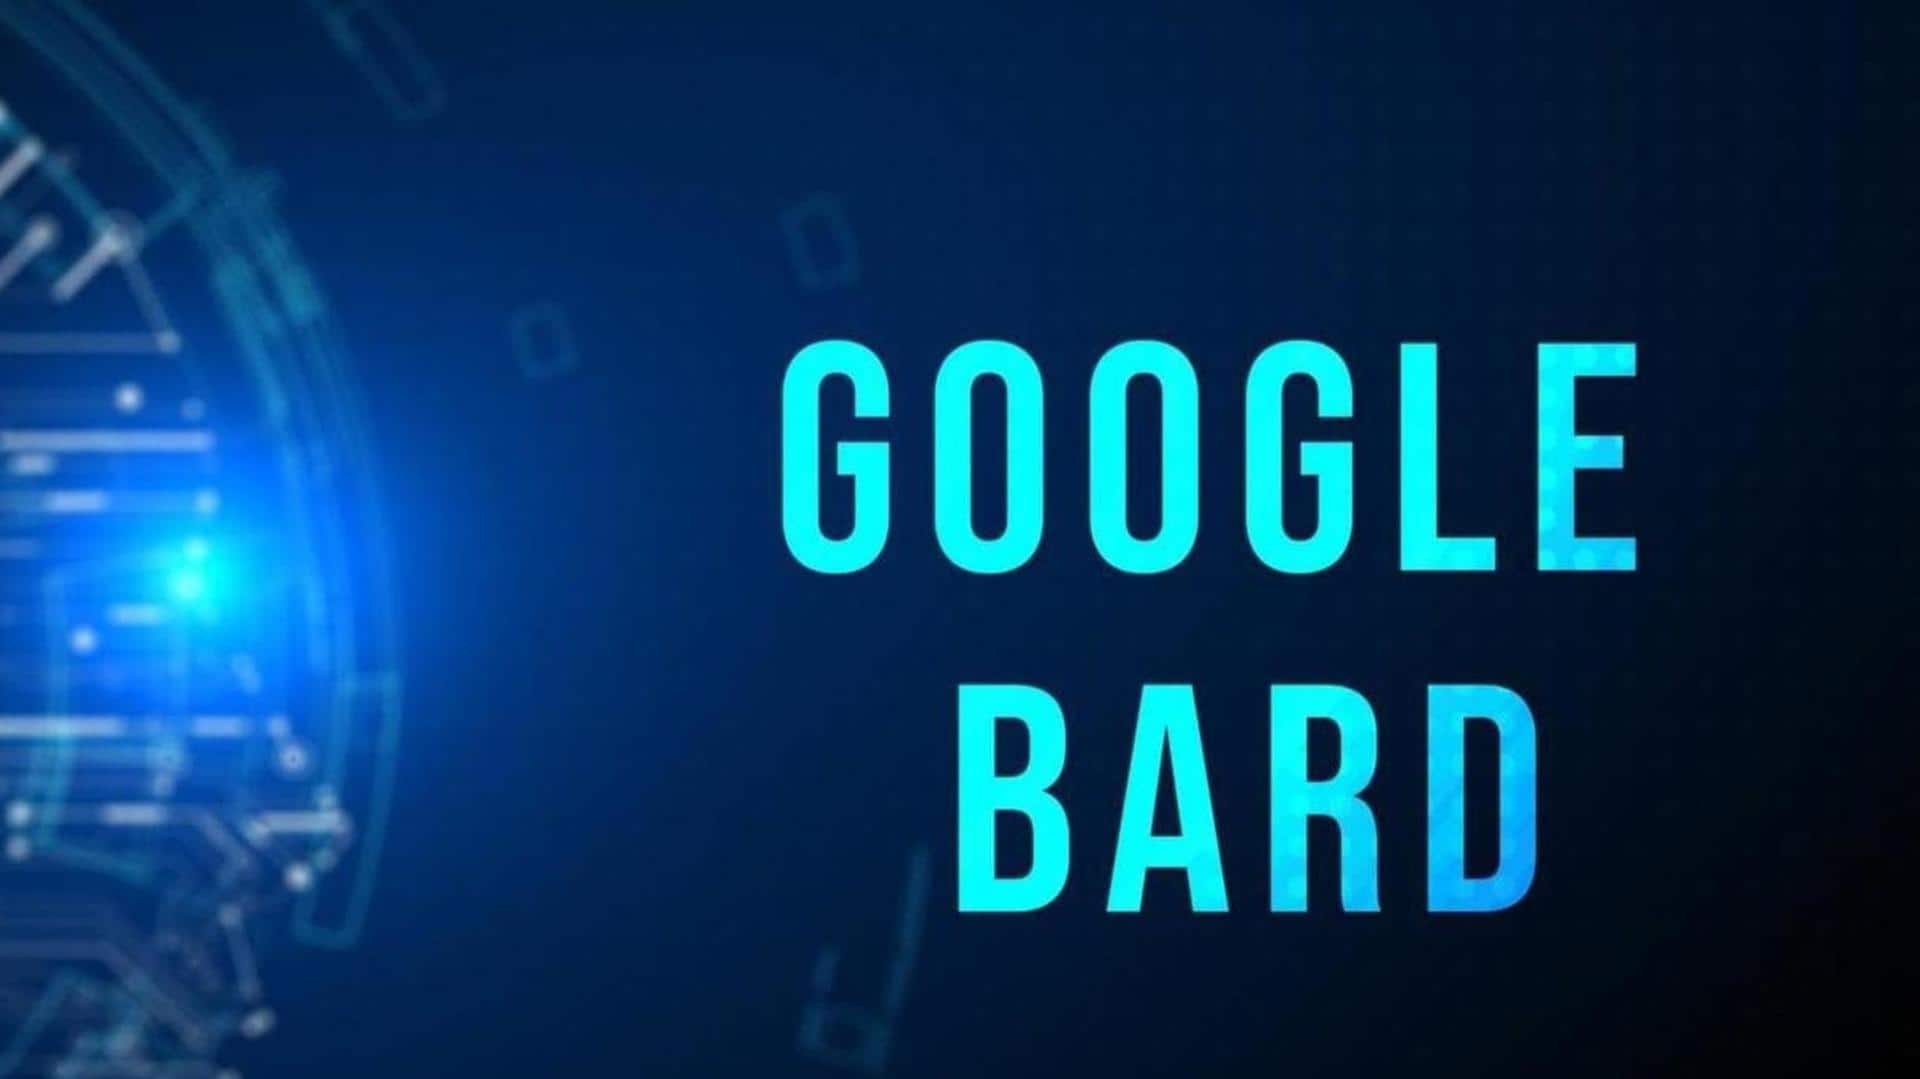 Google Bard plagiarism scandal: What you need to know